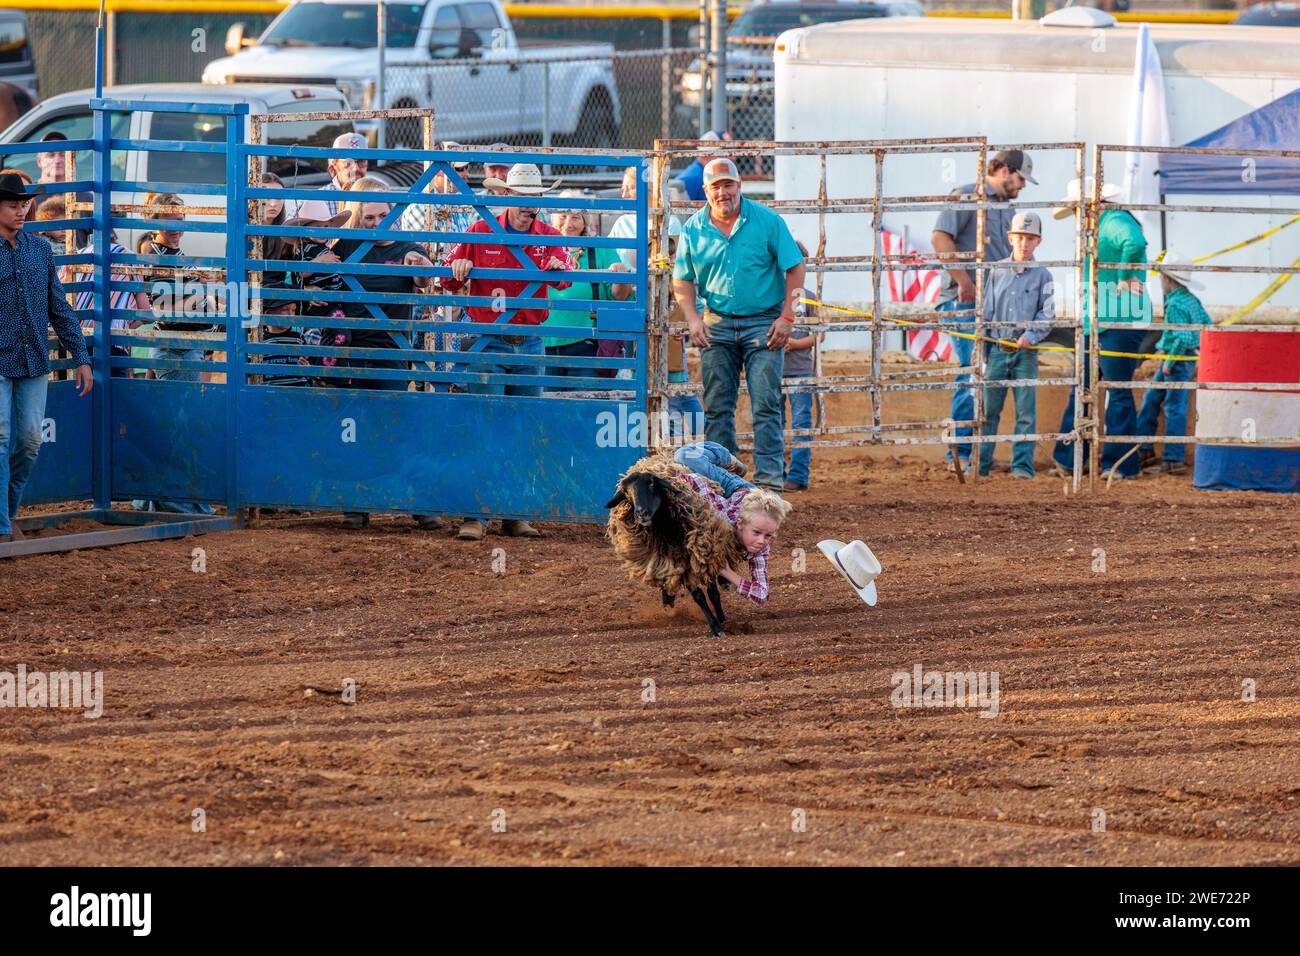 Young boy riding a sheep in a mutton busting event during the Hardin County Fair Rodeo in Savannah, Tennessee Stock Photo